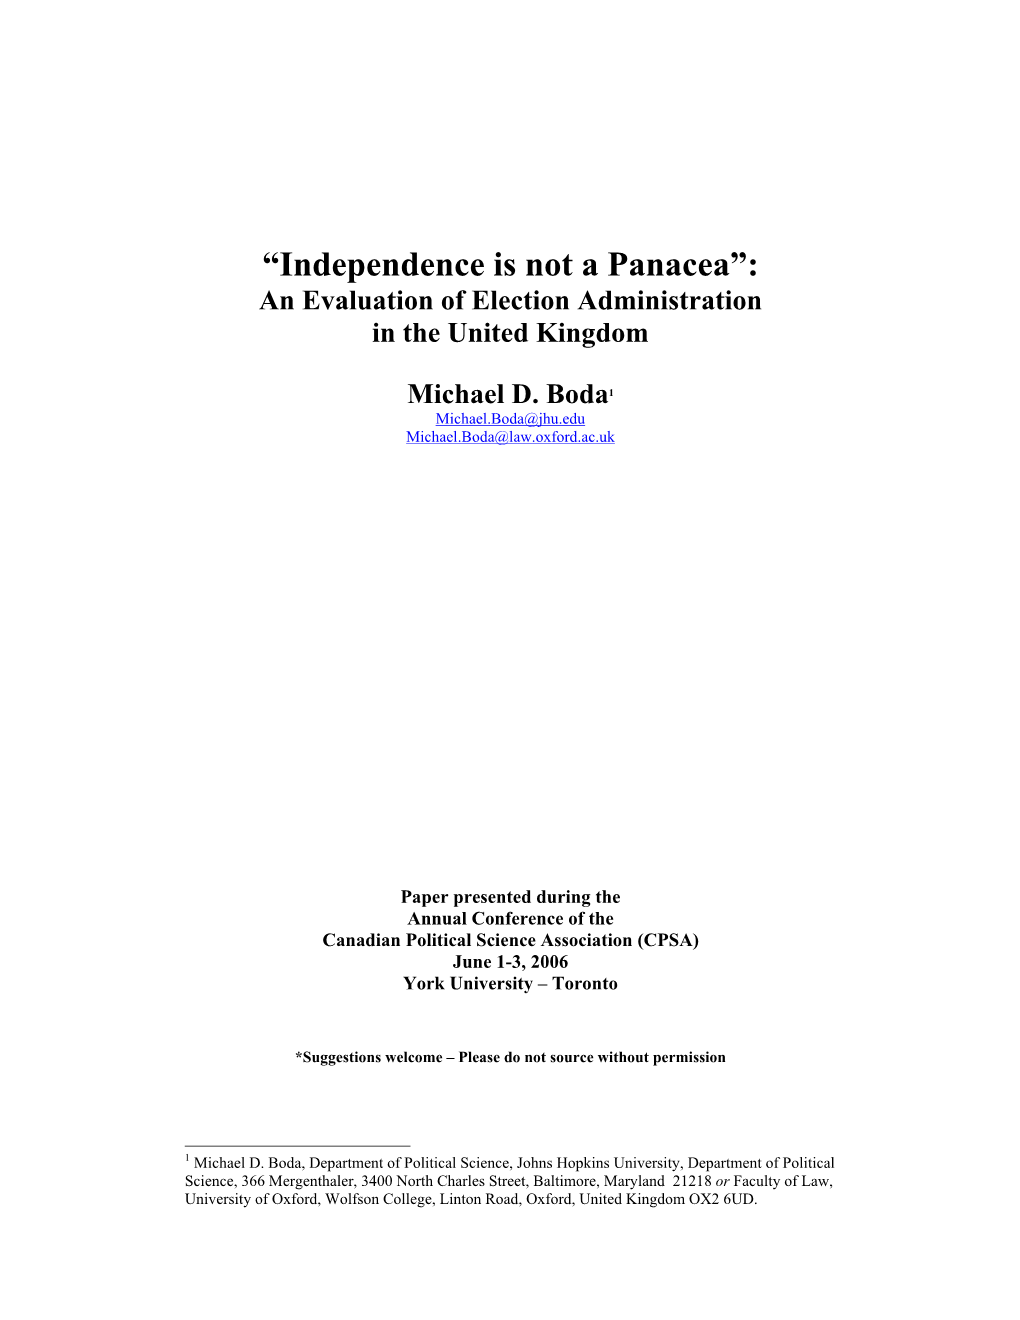 Independence Is Not a Panacea: an Evaluation of Election Administration in the United Kingdom